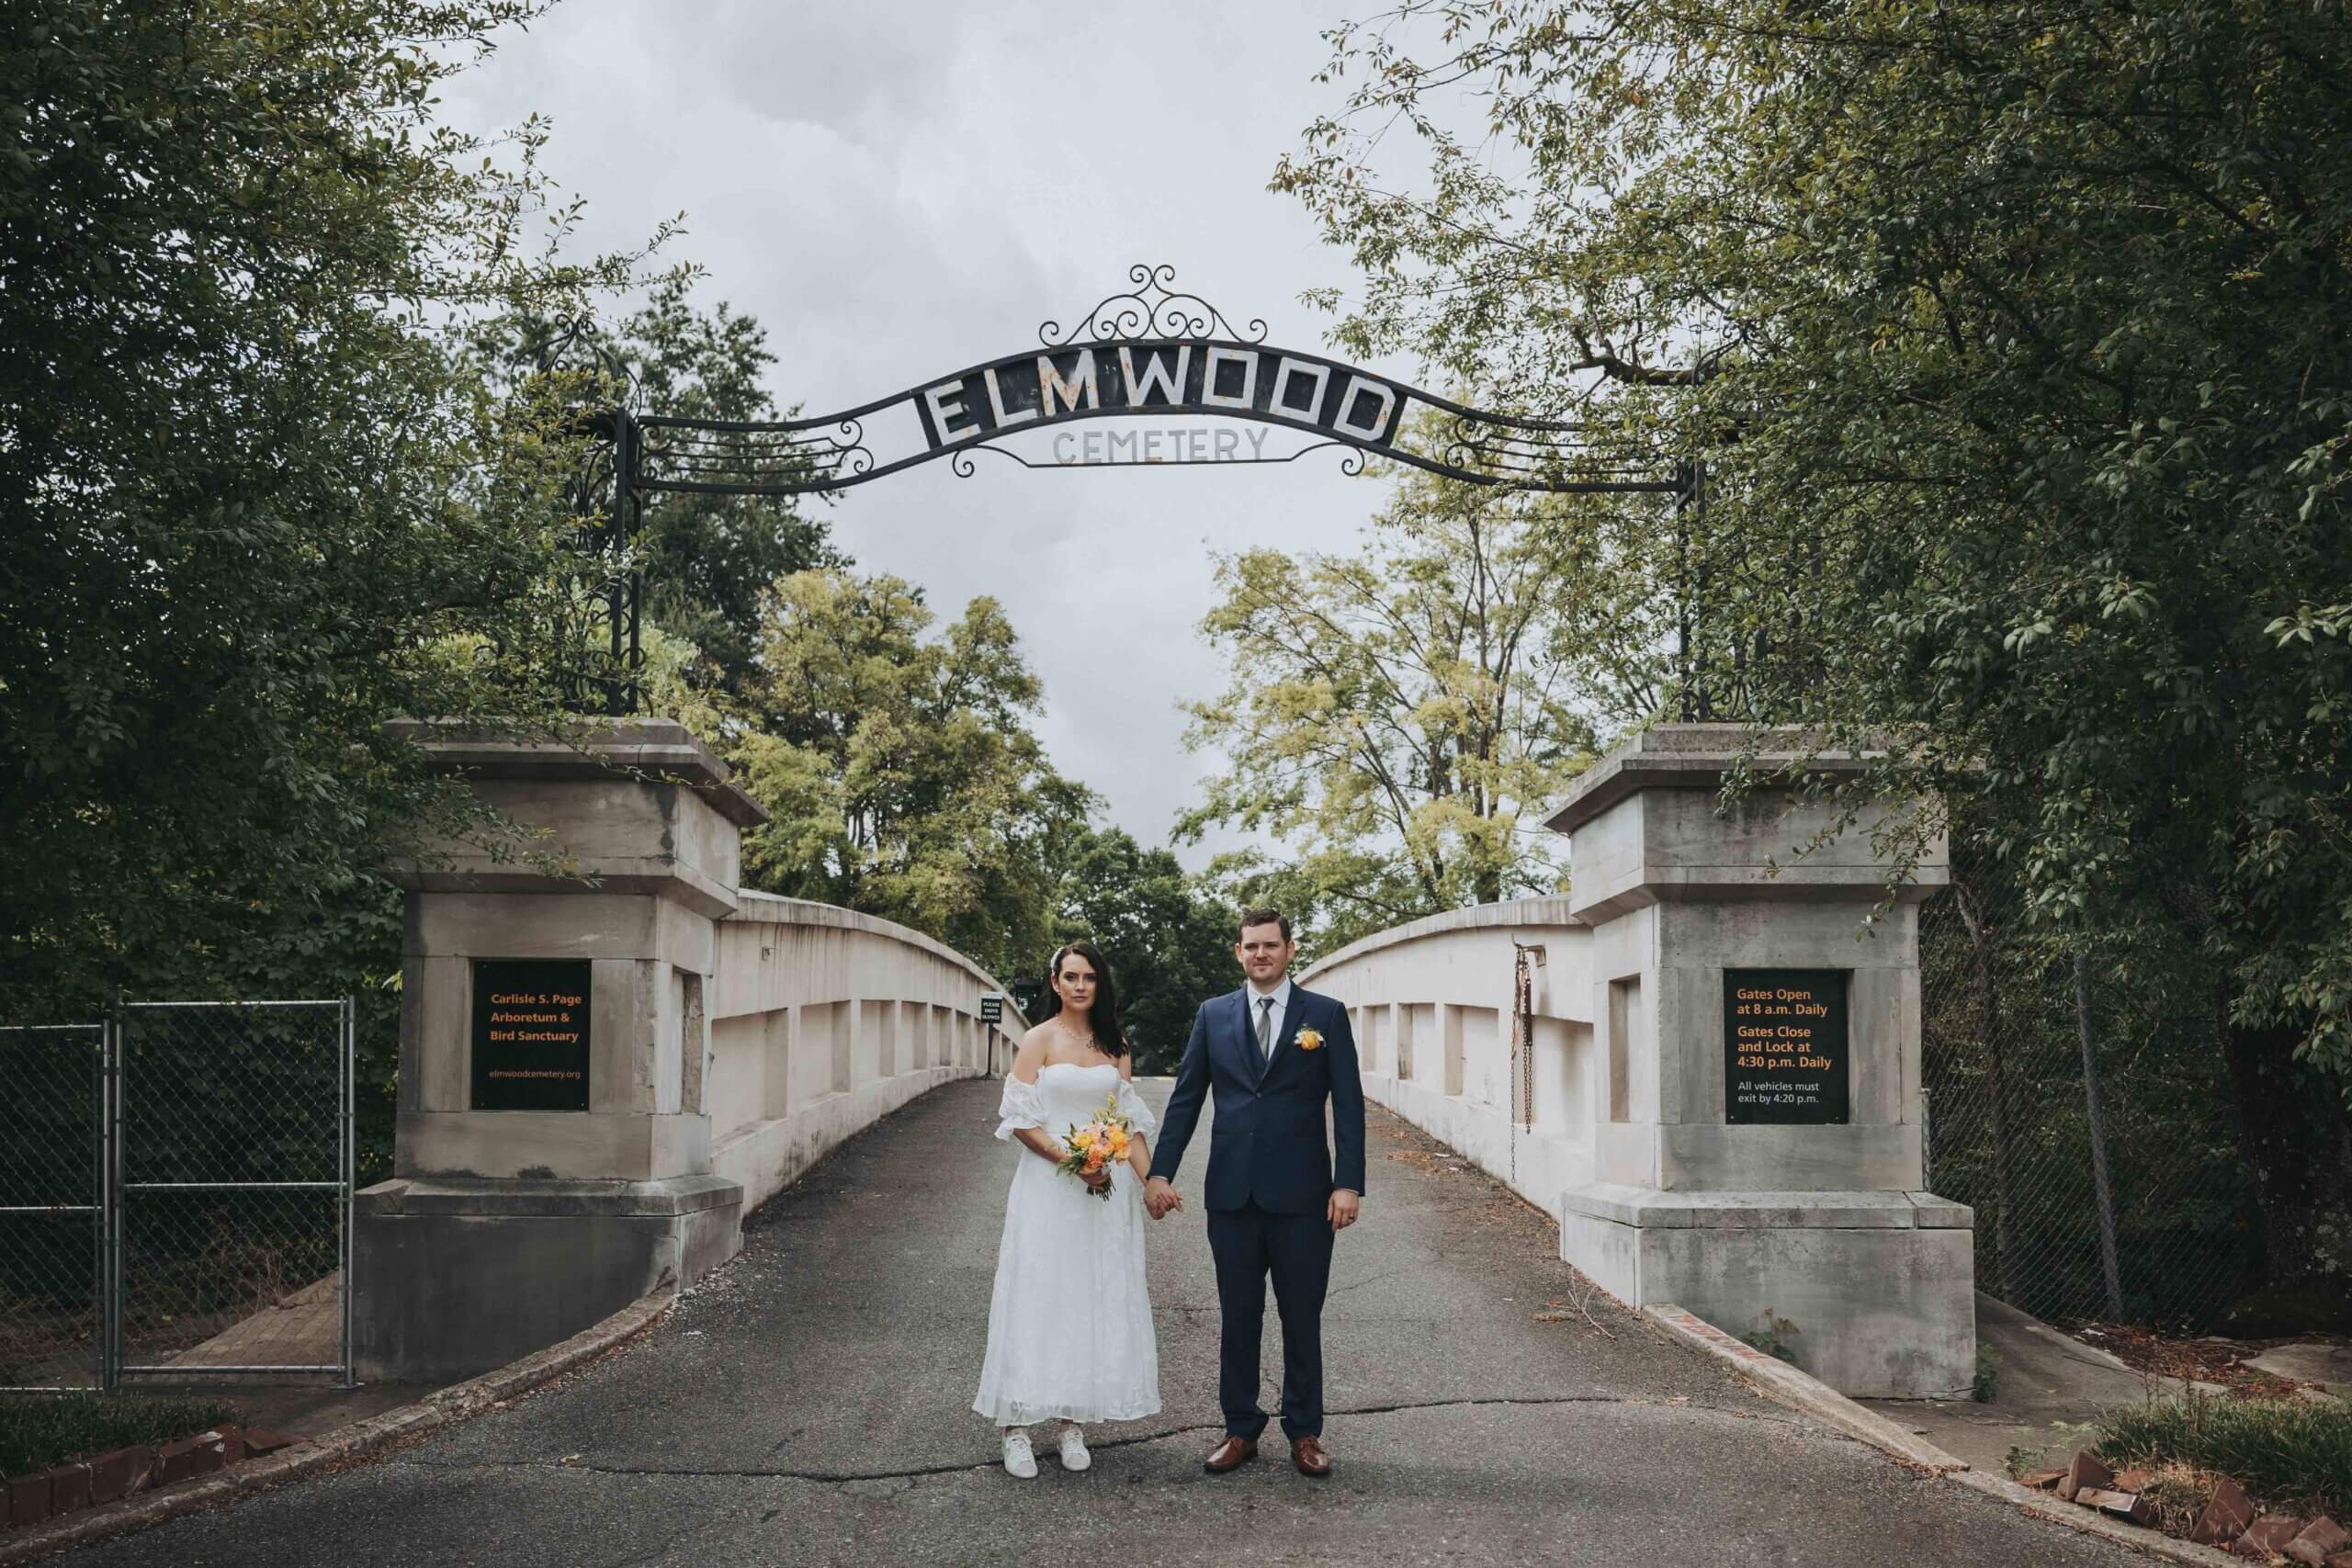 Newlywed couple stands at the entrance of Elmwood Cemetery, where they have just eloped.